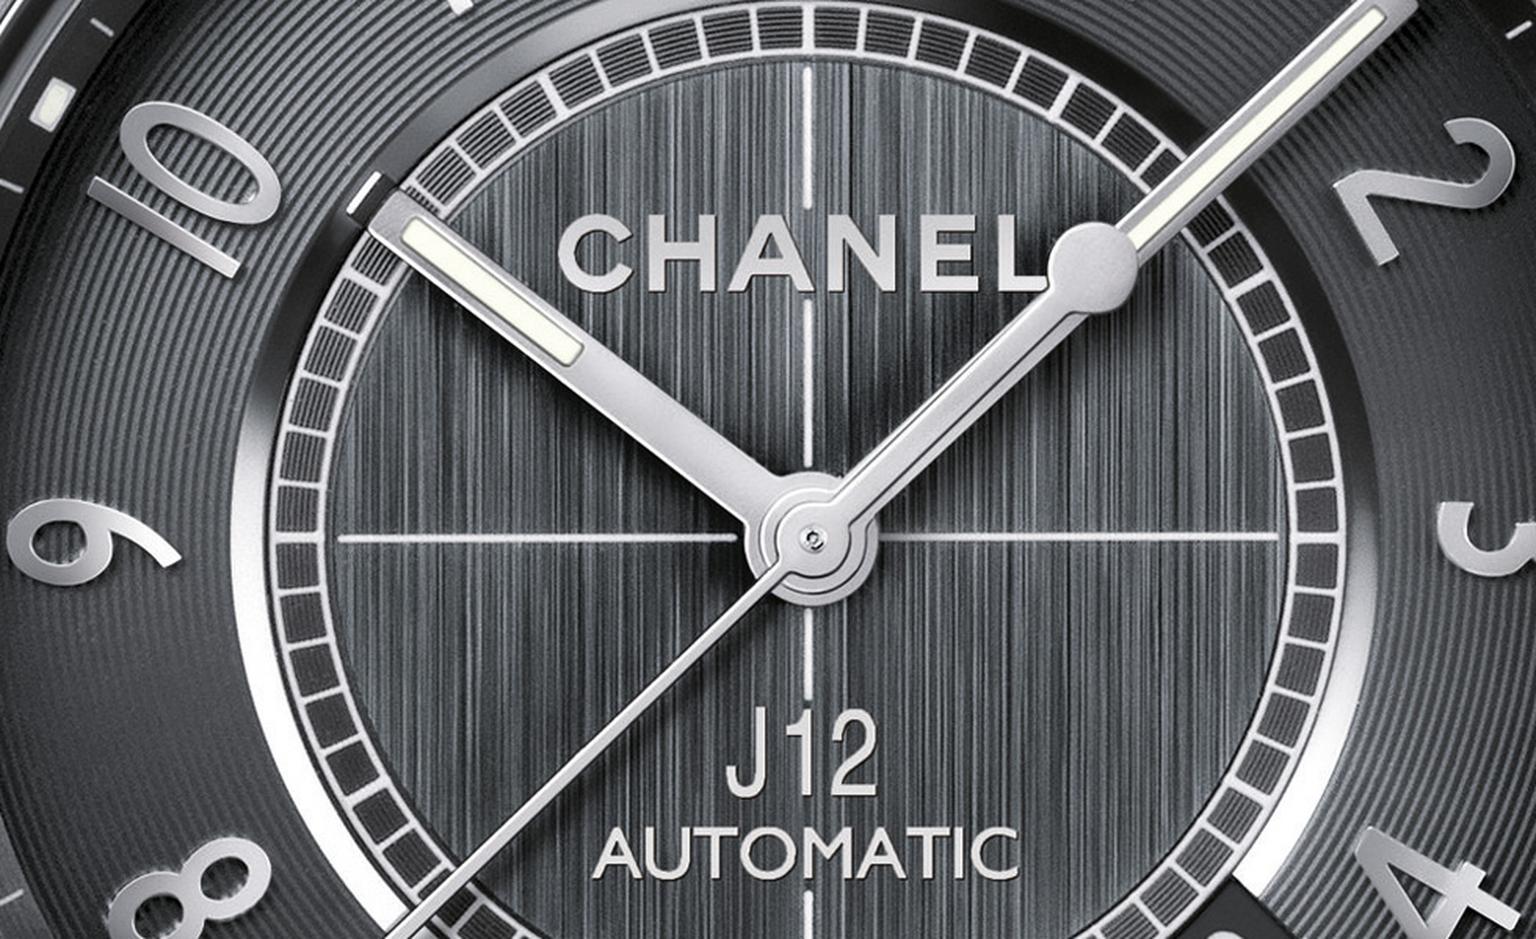 Close-up of dial of the Chanel J12 Chromatic watch. Self-winding mechanical movement. Functions: hours, minutes, seconds, date. 42-hour power reserve. Unidirectional rotating bezel. Screw-down crown, water-resistance 200 meters. 41mm diameter